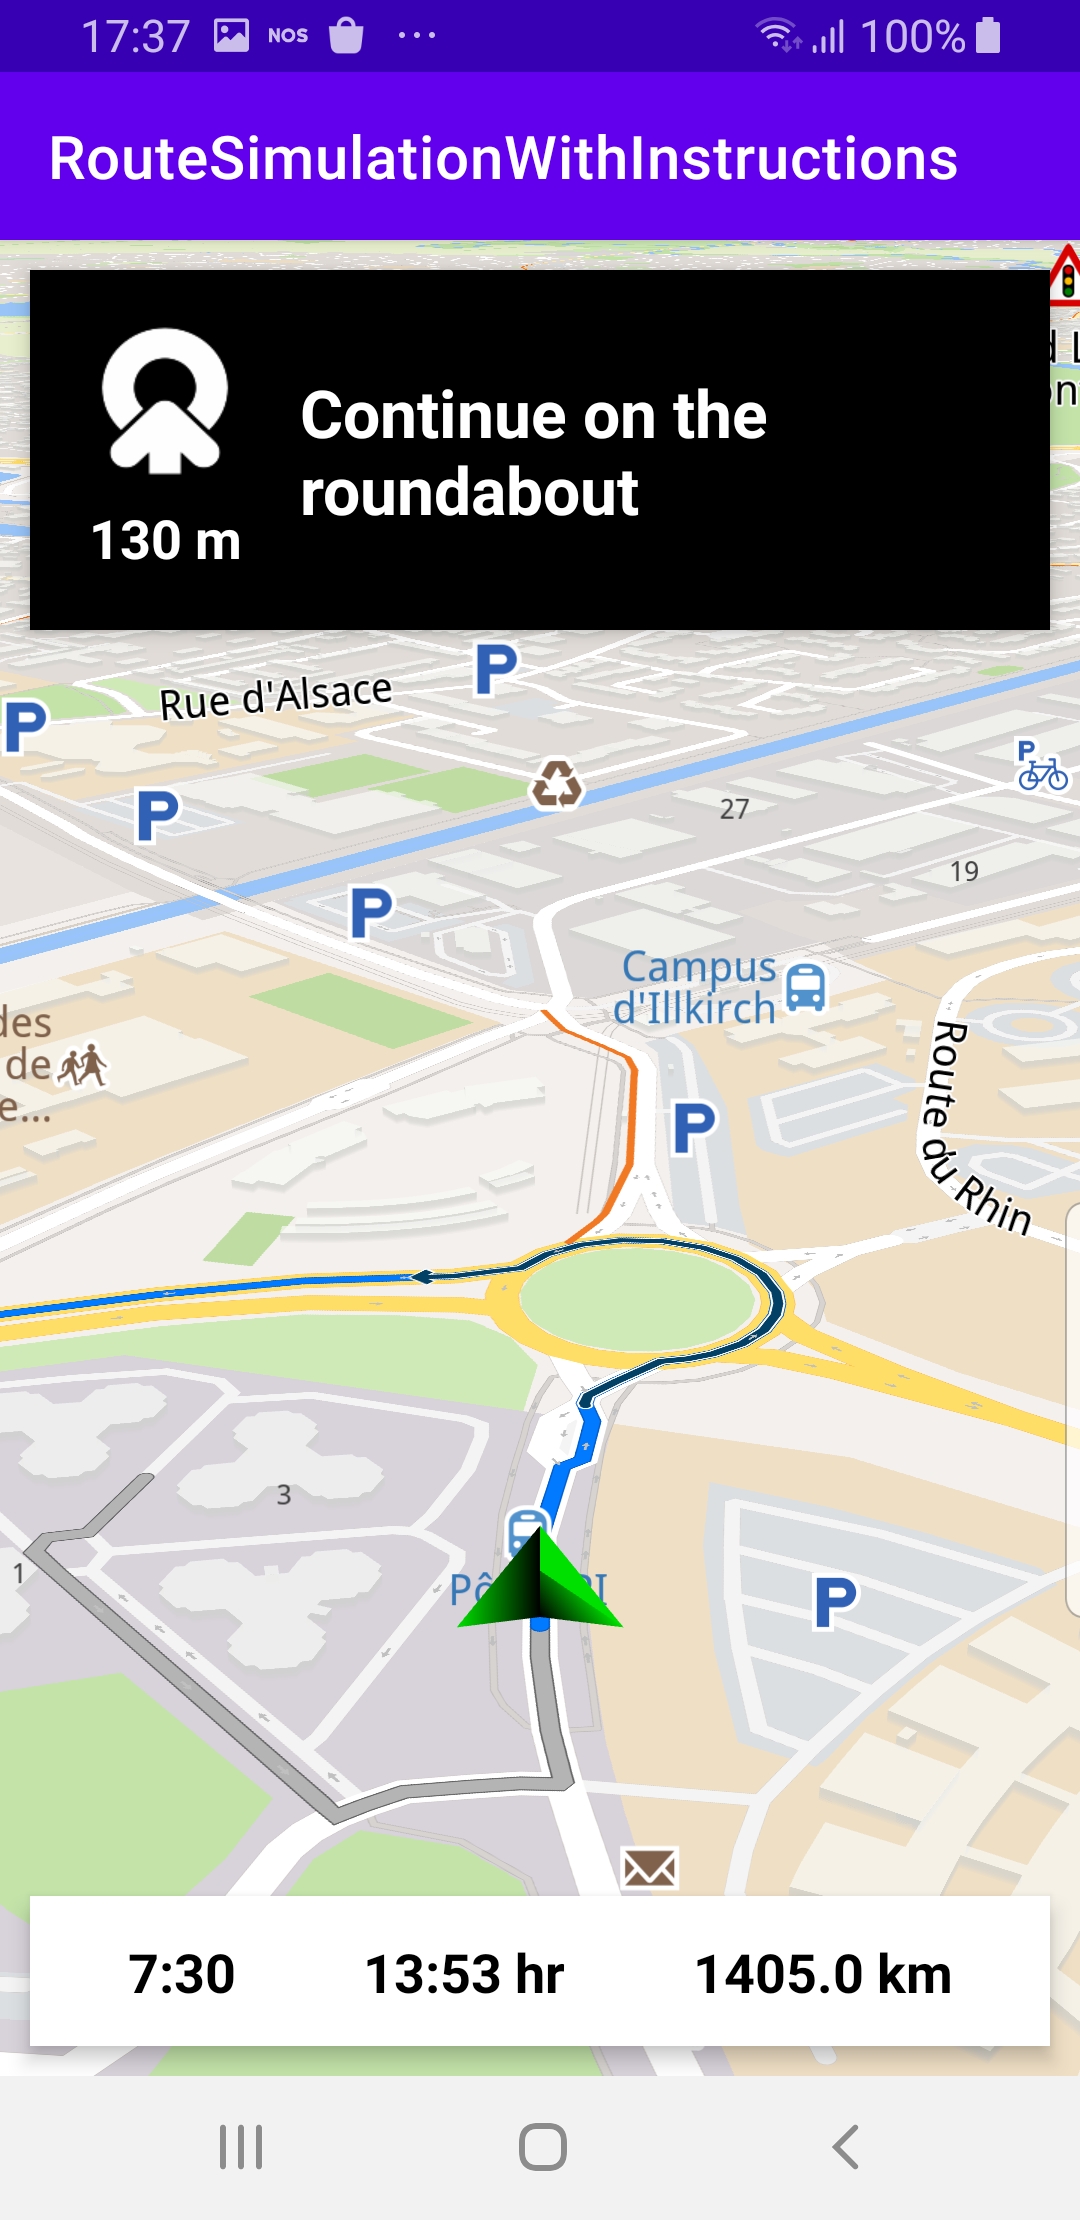 Route simulation with instructions example Android screenshot